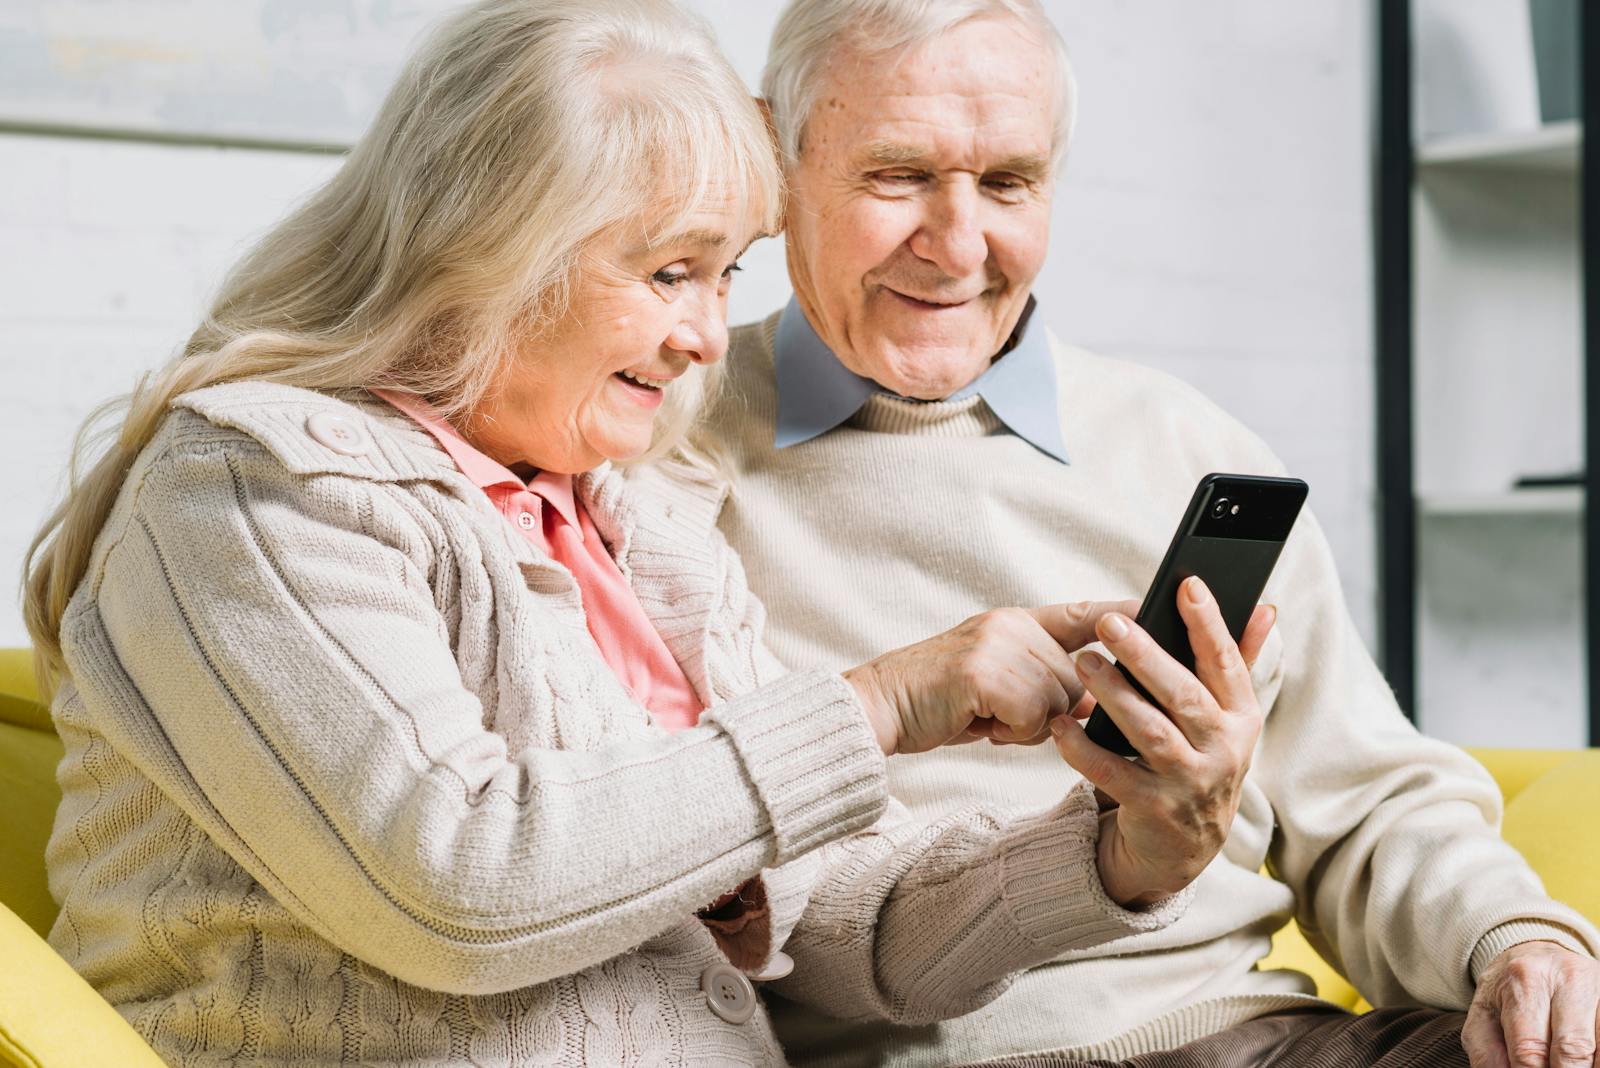 Two older people looking on a mobile phone